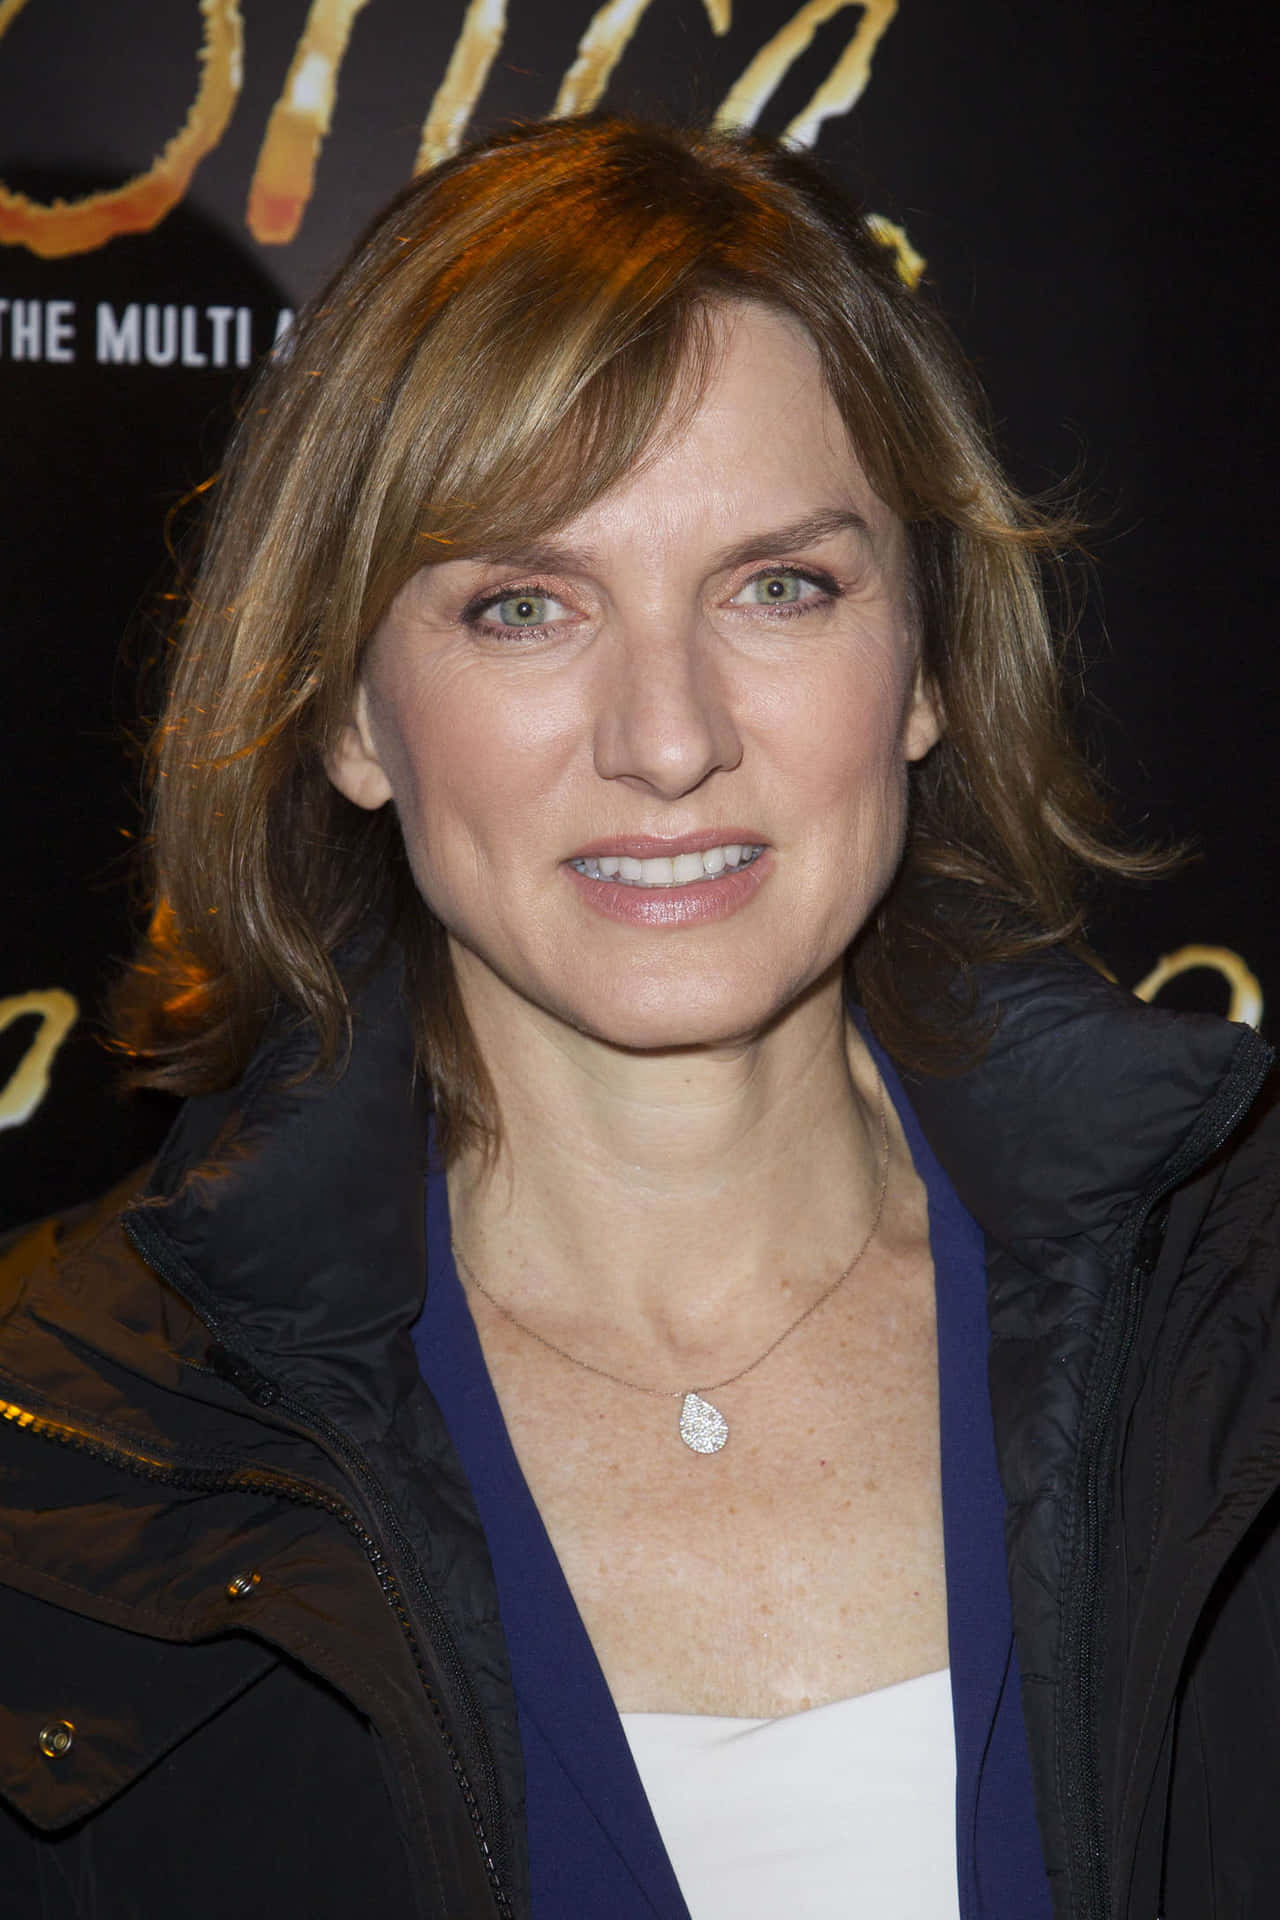 British journalist and television presenter Fiona Bruce smiling for the camera Wallpaper